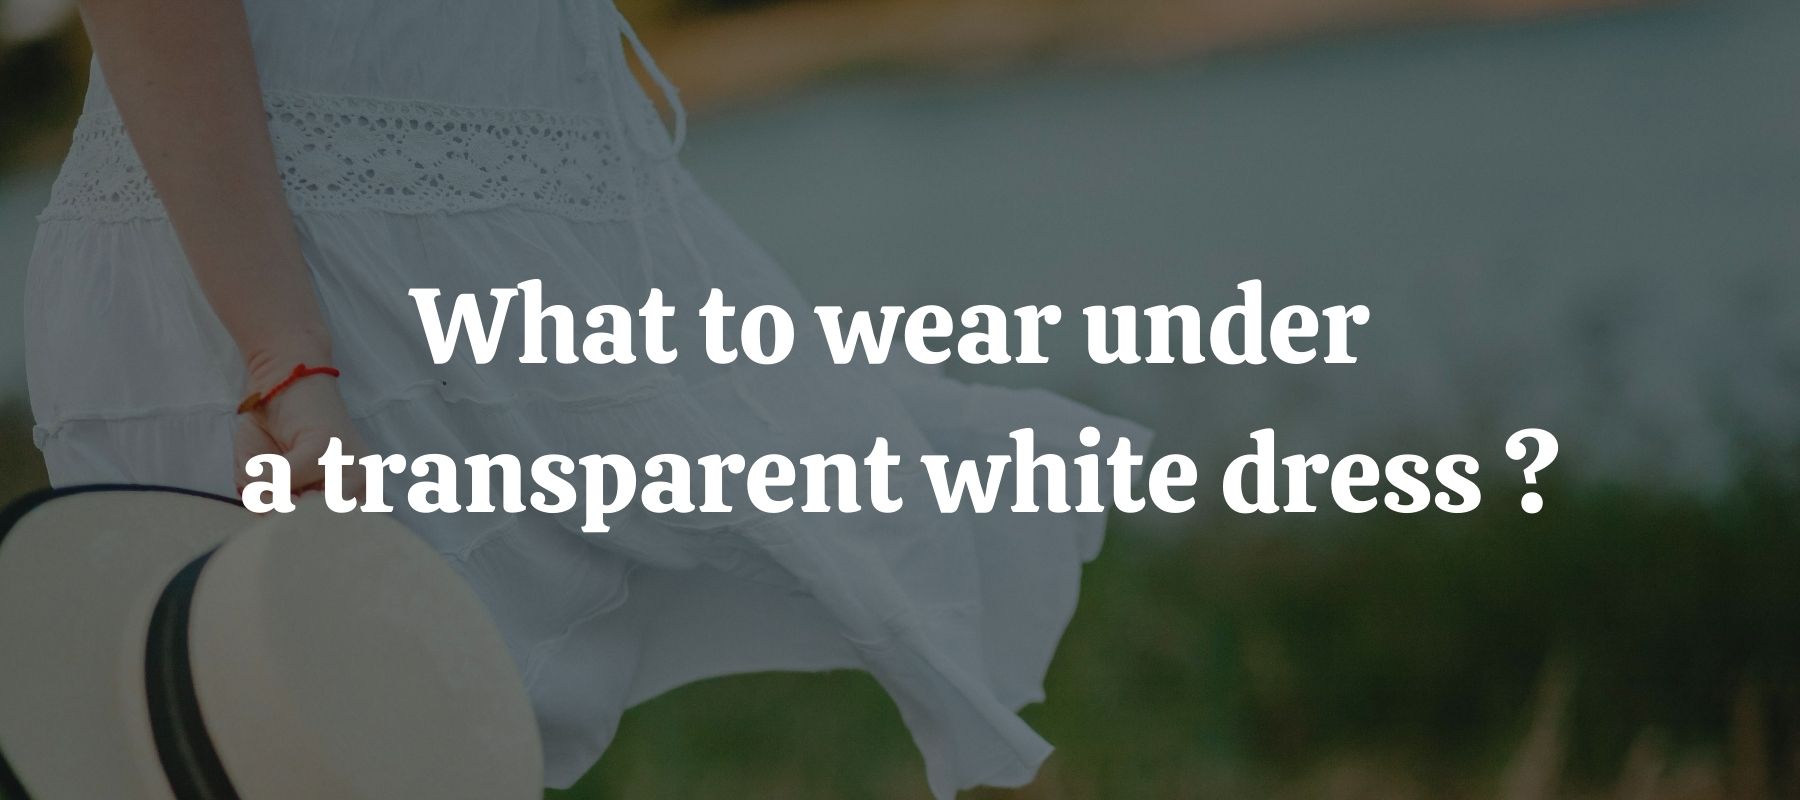 What to wear under a transparent white dress